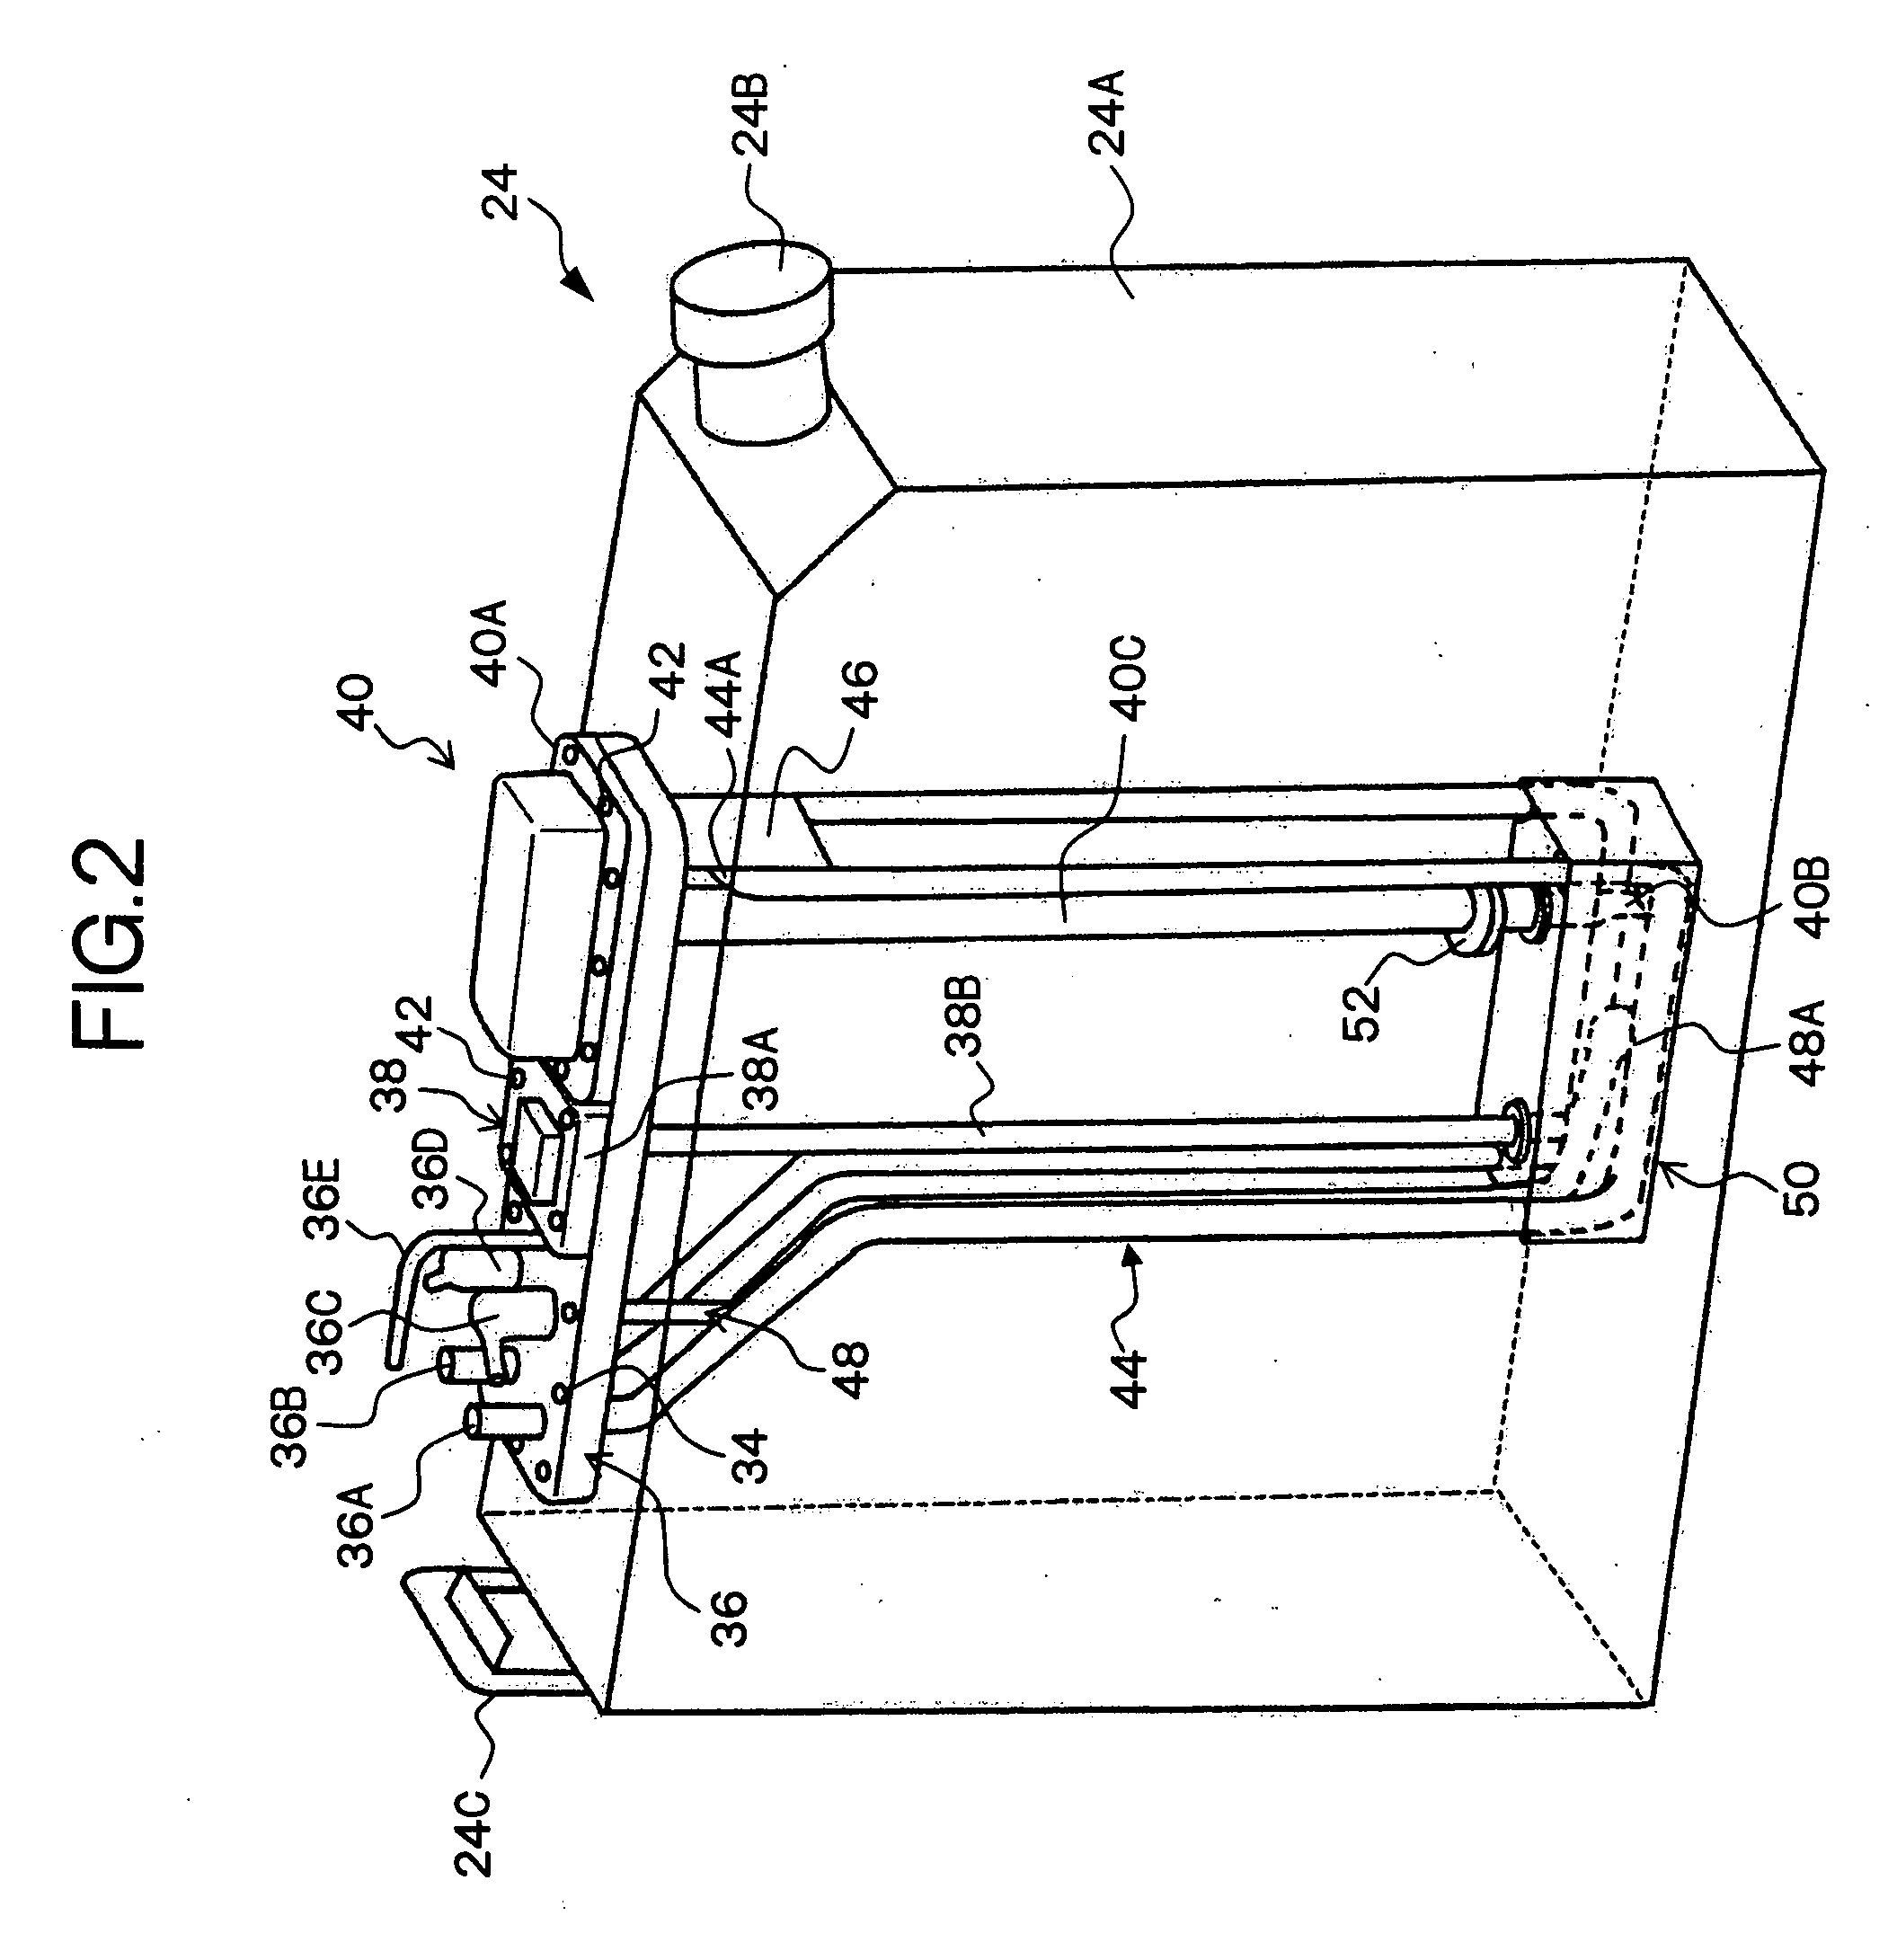 Reducing agent container having novel structure